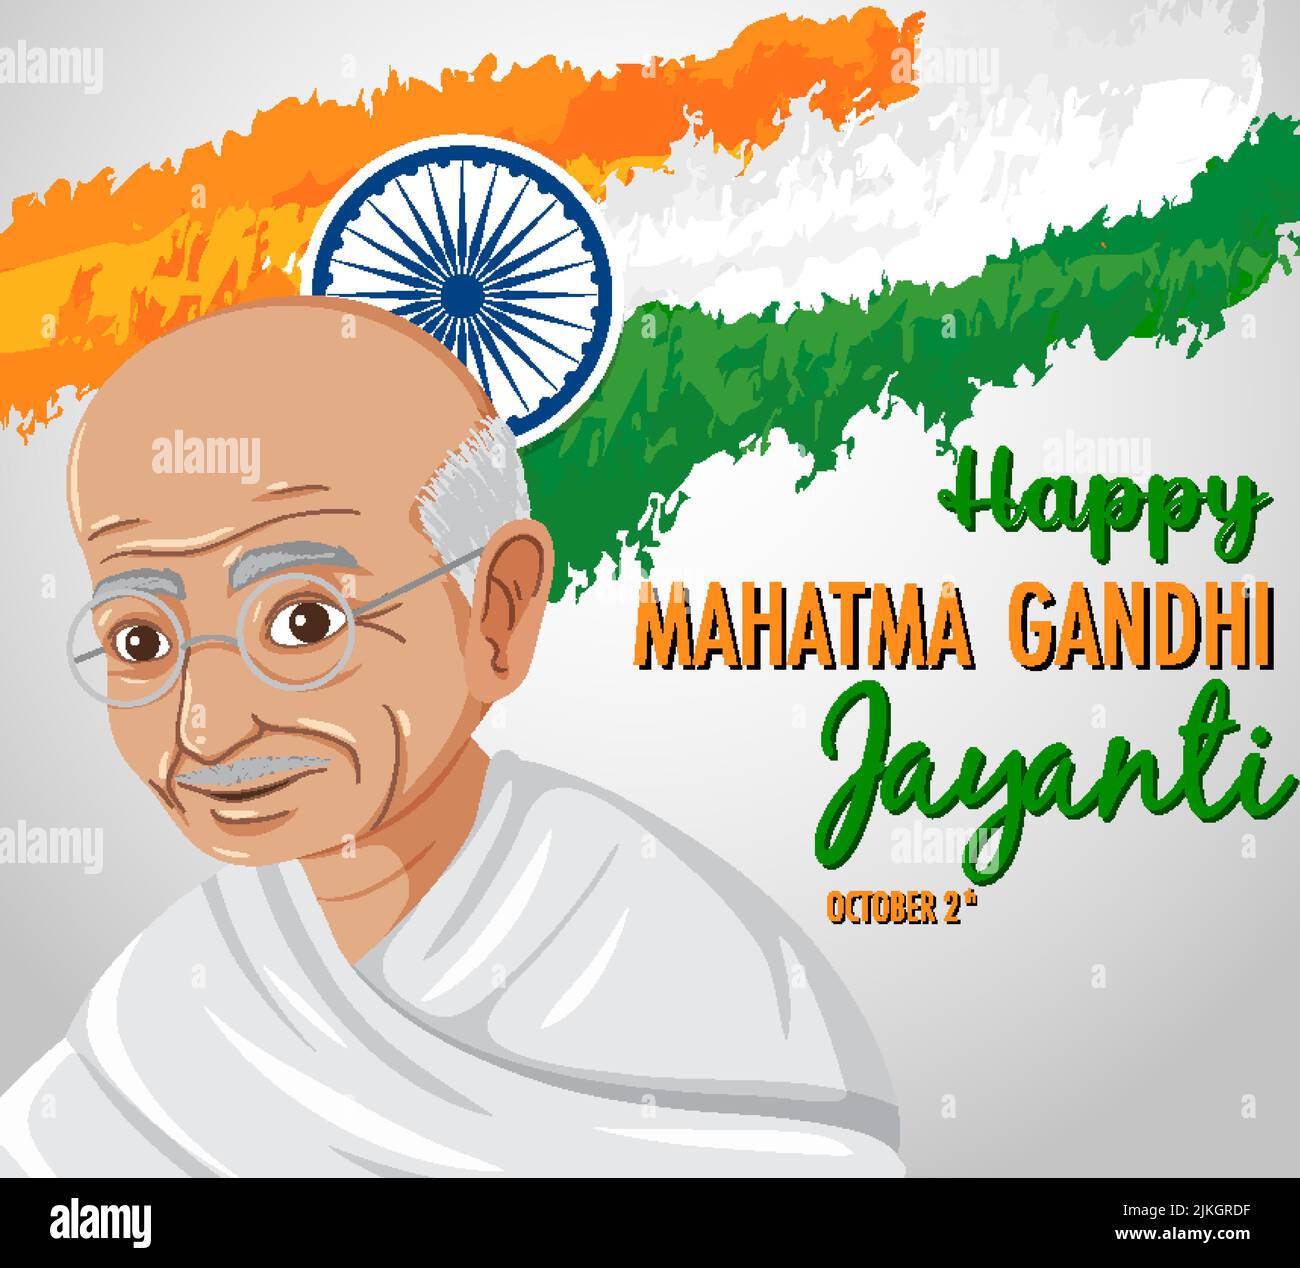 Happy gandhi jayanti template in indian style Vector Image